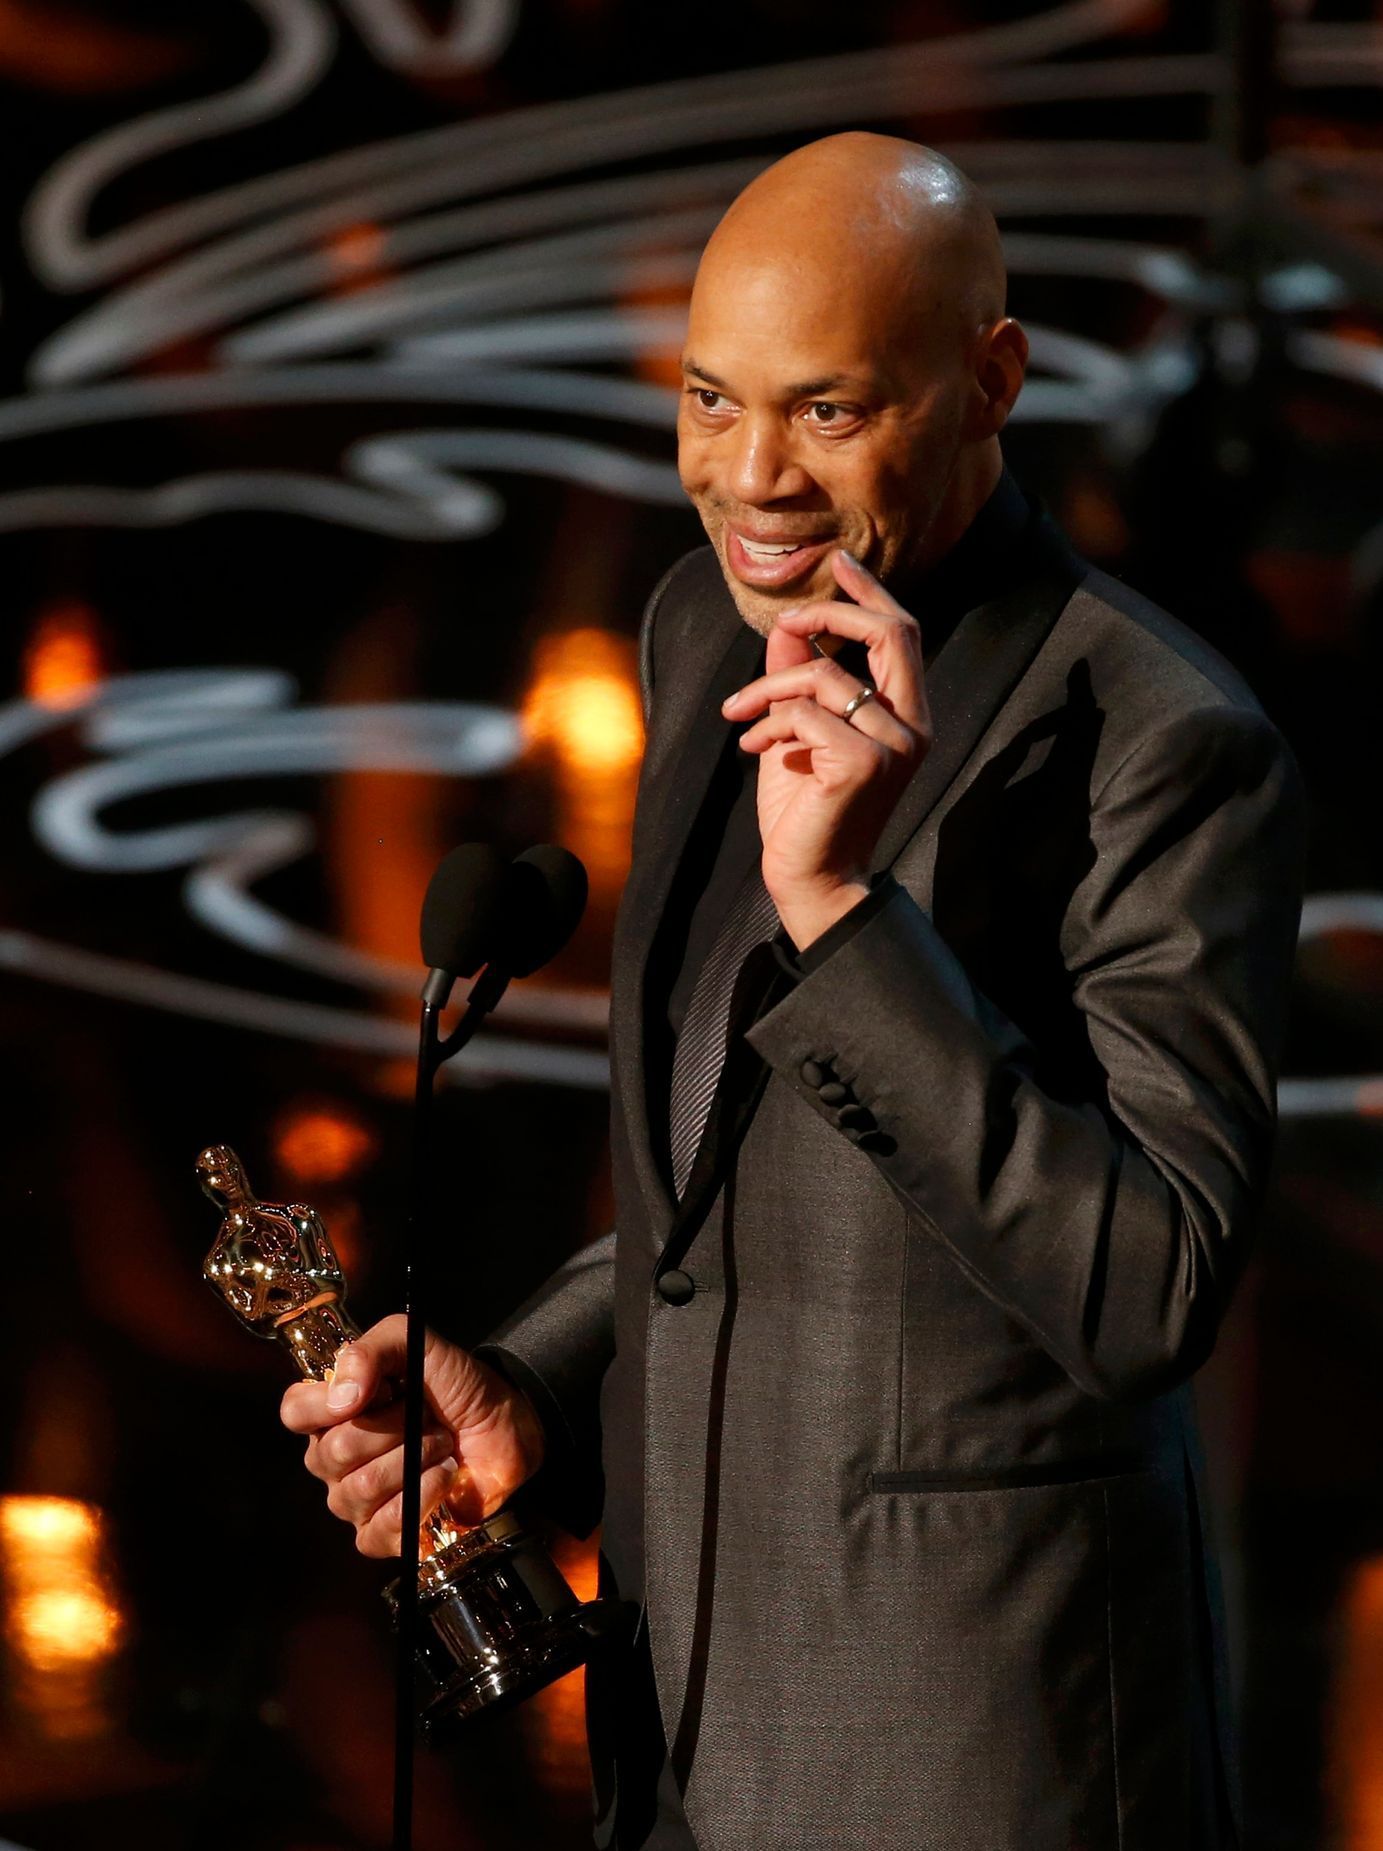 John Ridley accepts the Oscar for adapted screenplay for &quot;12 Years a Slave&quot; at the 86th Academy Awards in Hollywood